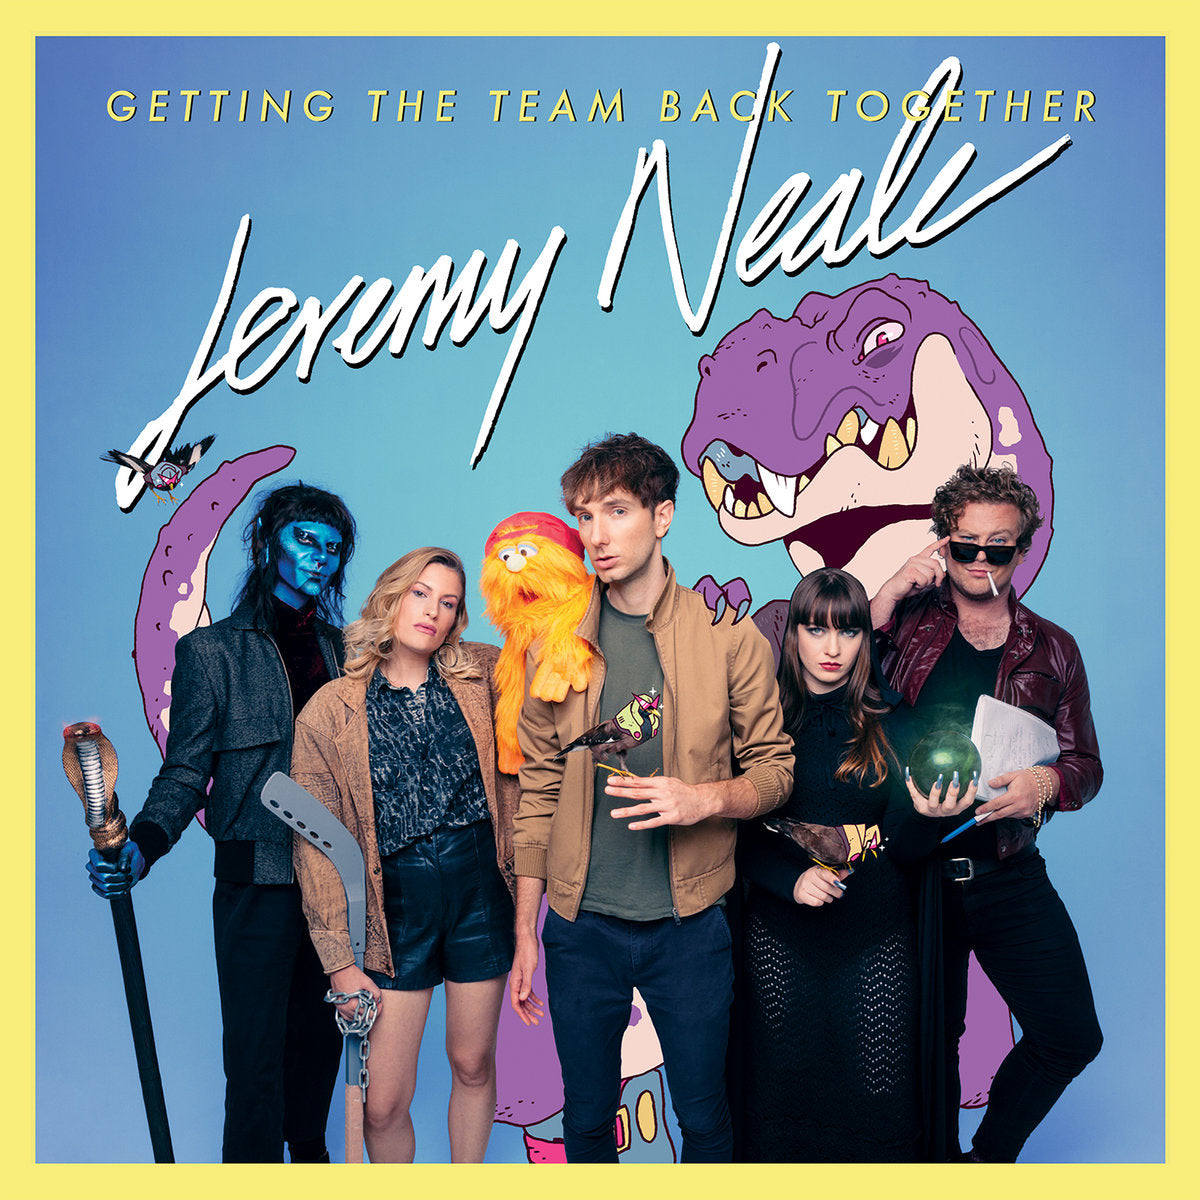 JEREMY NEALE - GETTING THE TEAM BACK TOGETHER - VINYL LP - Wah Wah Records